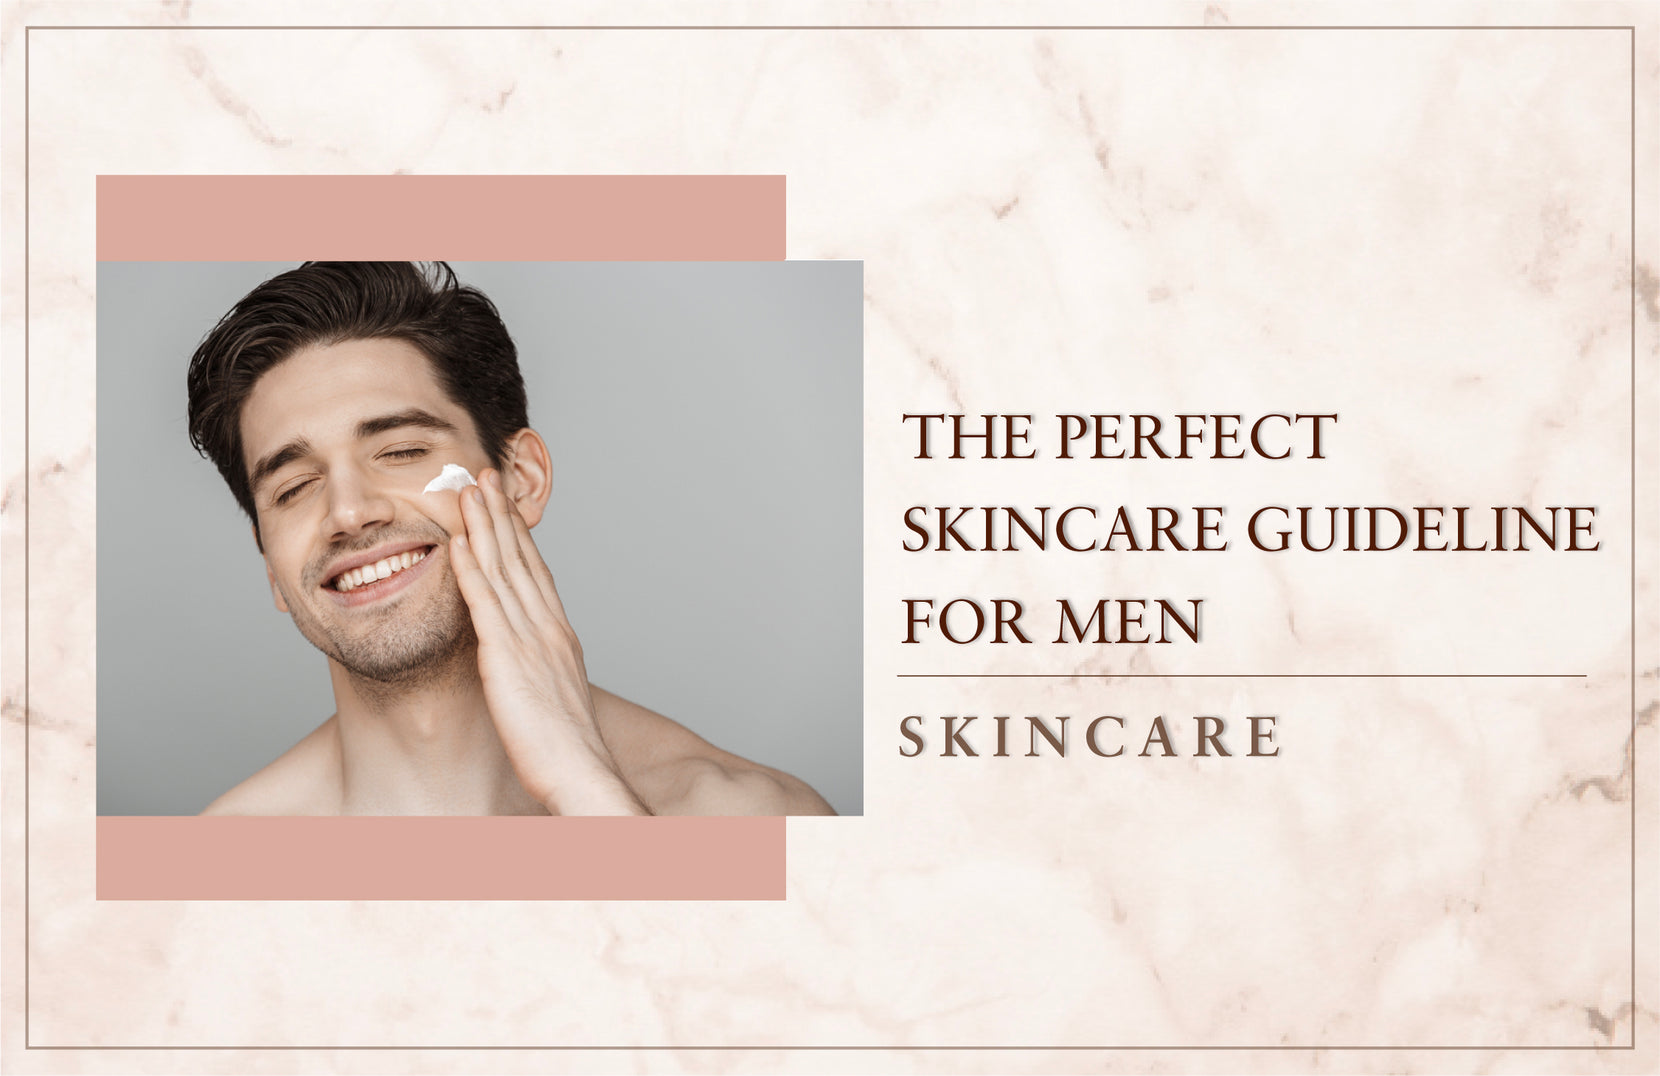 The Perfect Skincare Guideline for Men